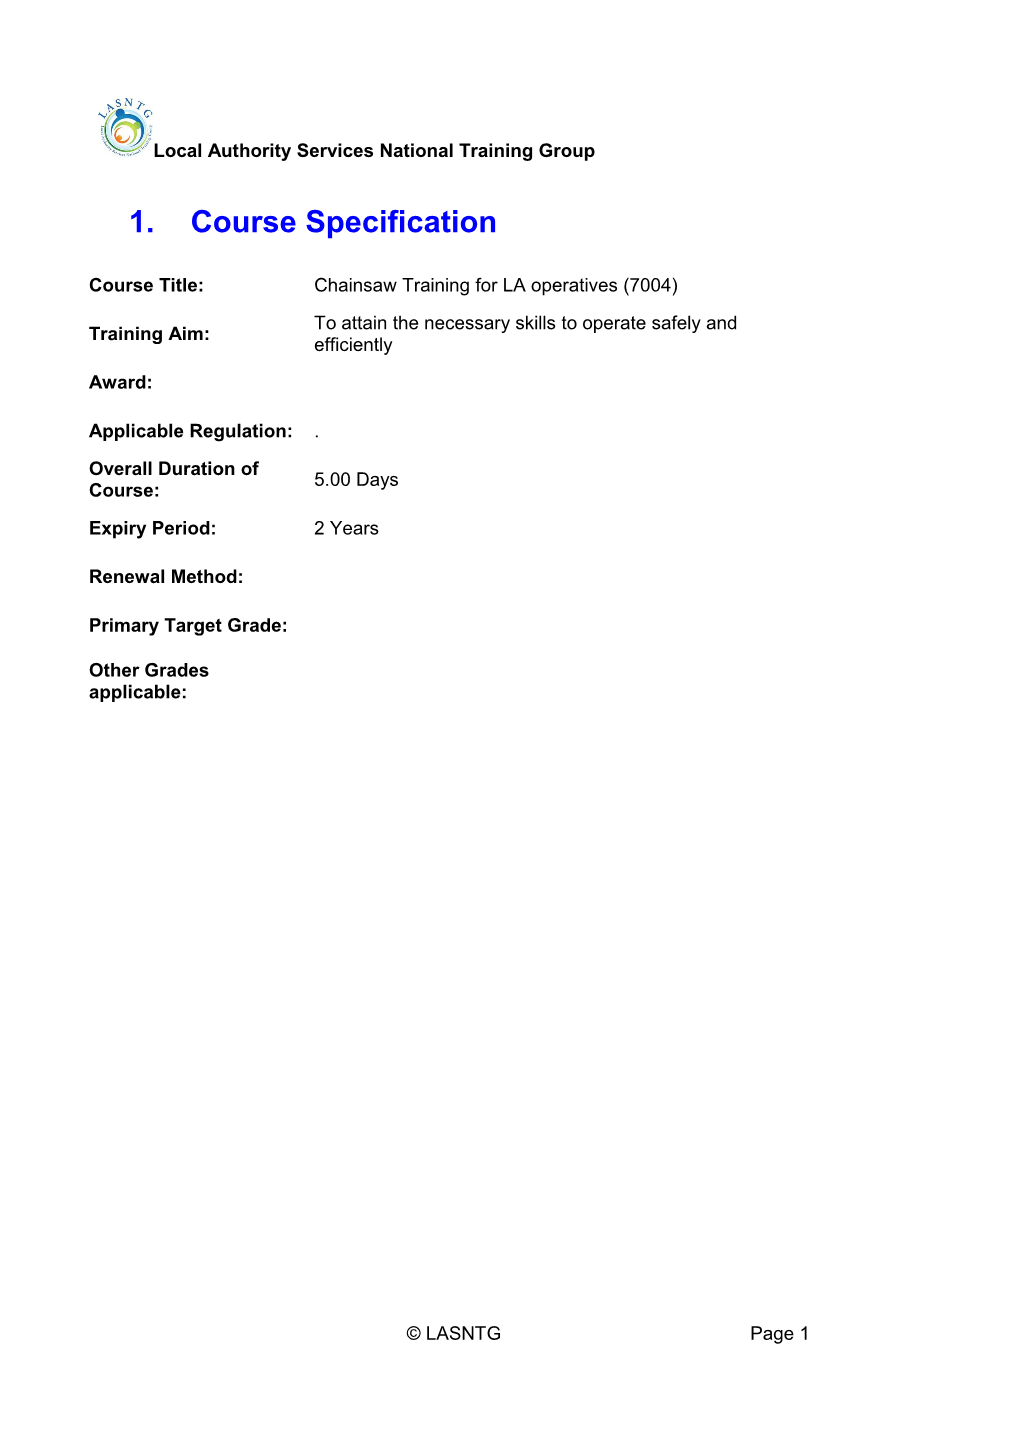 Course Specification s2